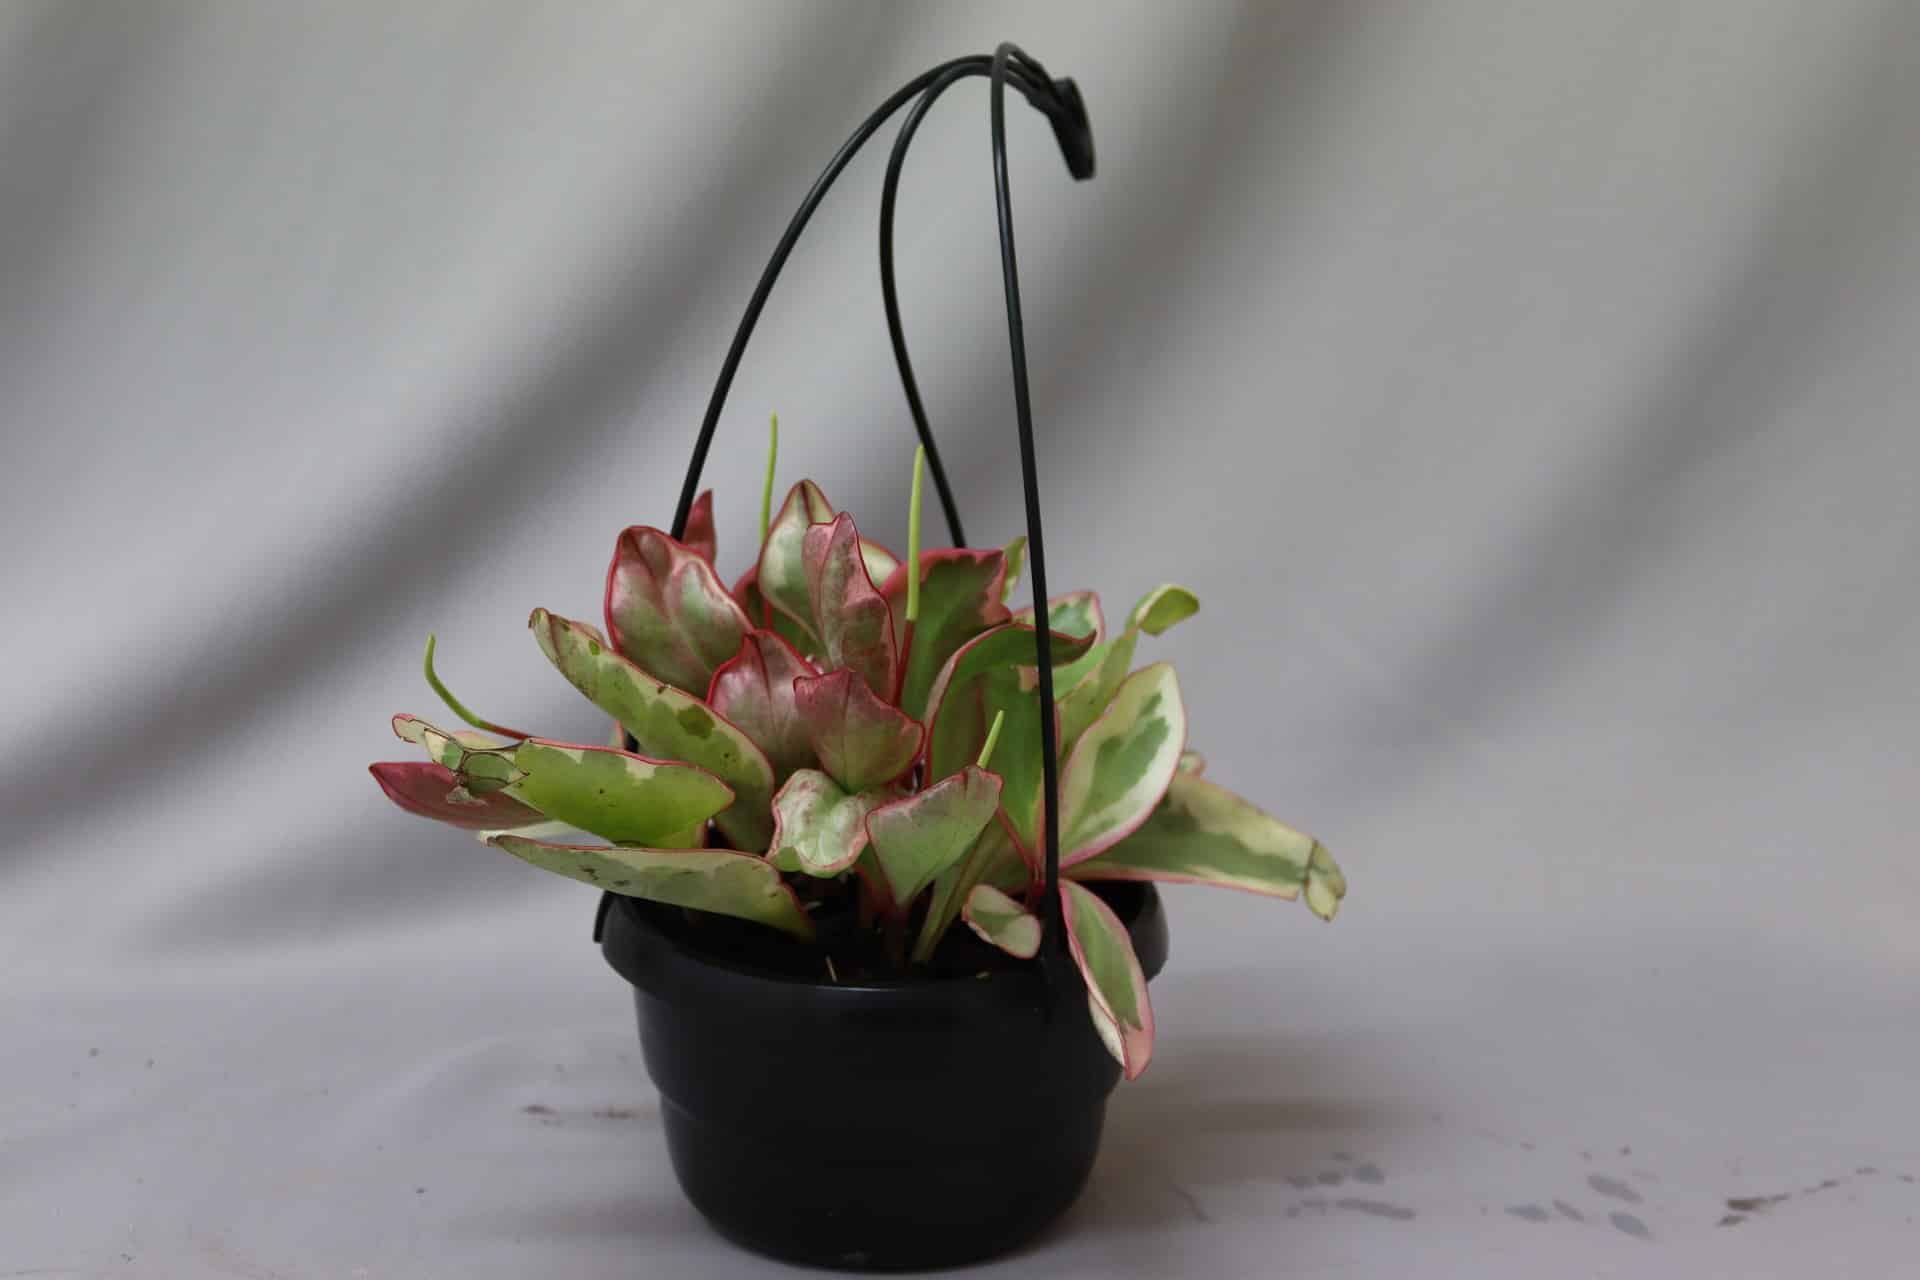 Small black hanging bowl with Peperomia Julii plant. The plant has green and white leaves with red tips.